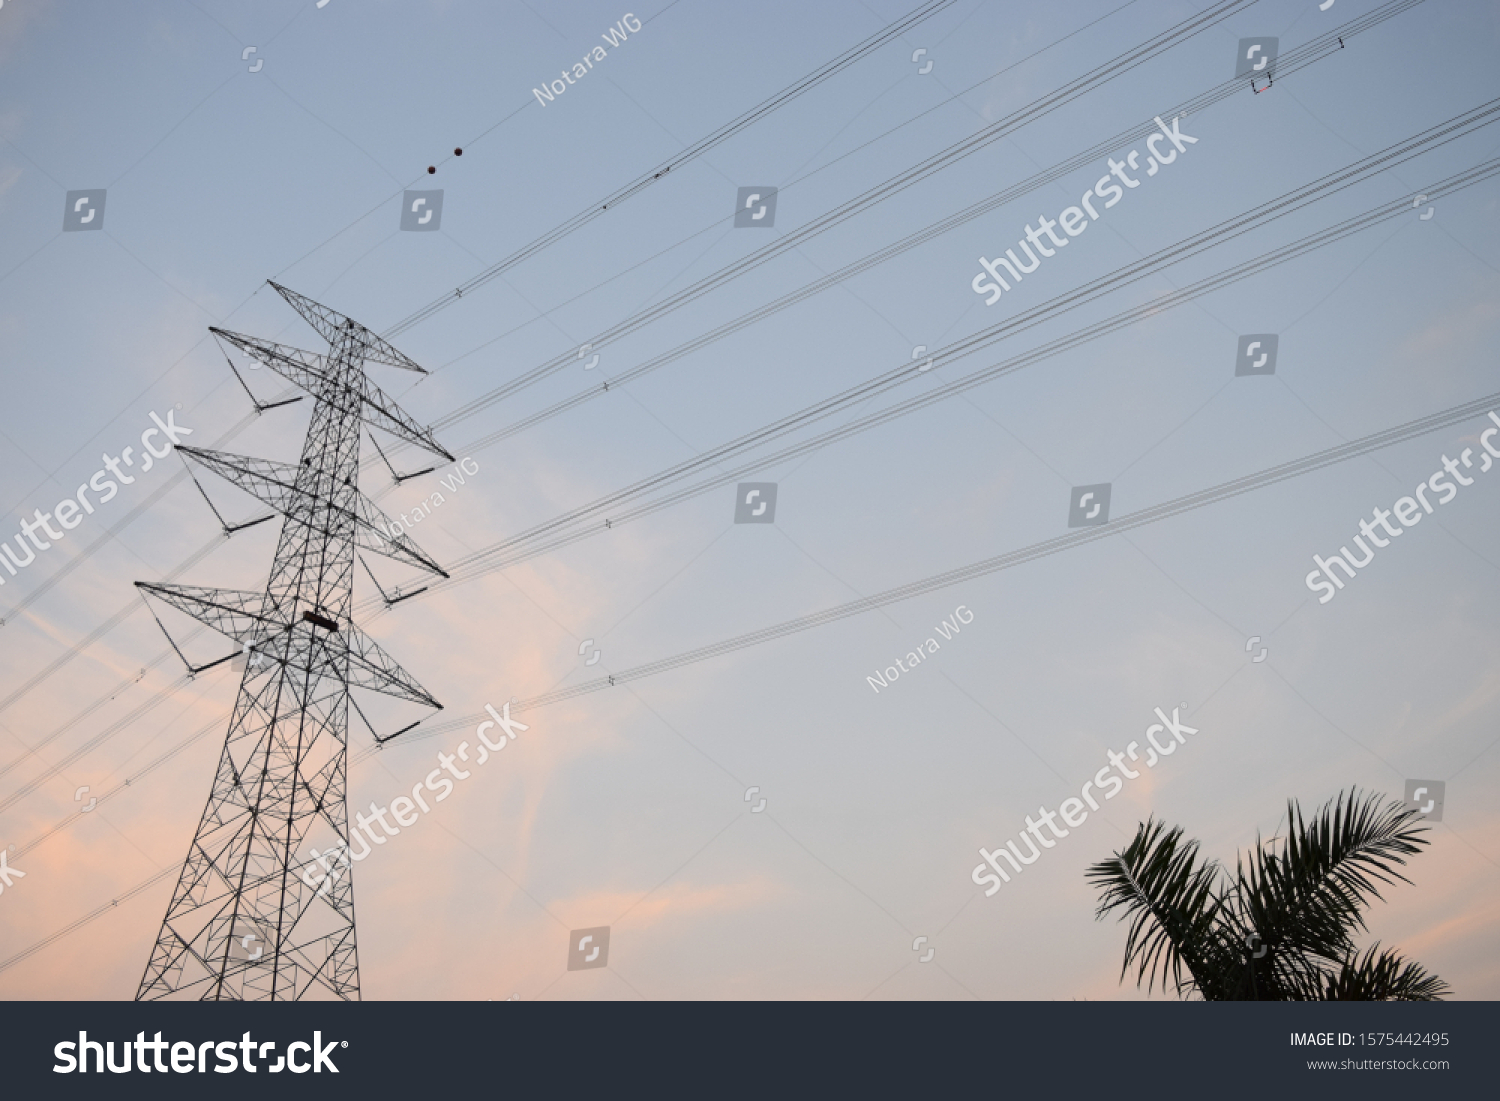 
An air power line is a structure used in the transmission and distribution of electricity to deliver electricity to distant places #1575442495